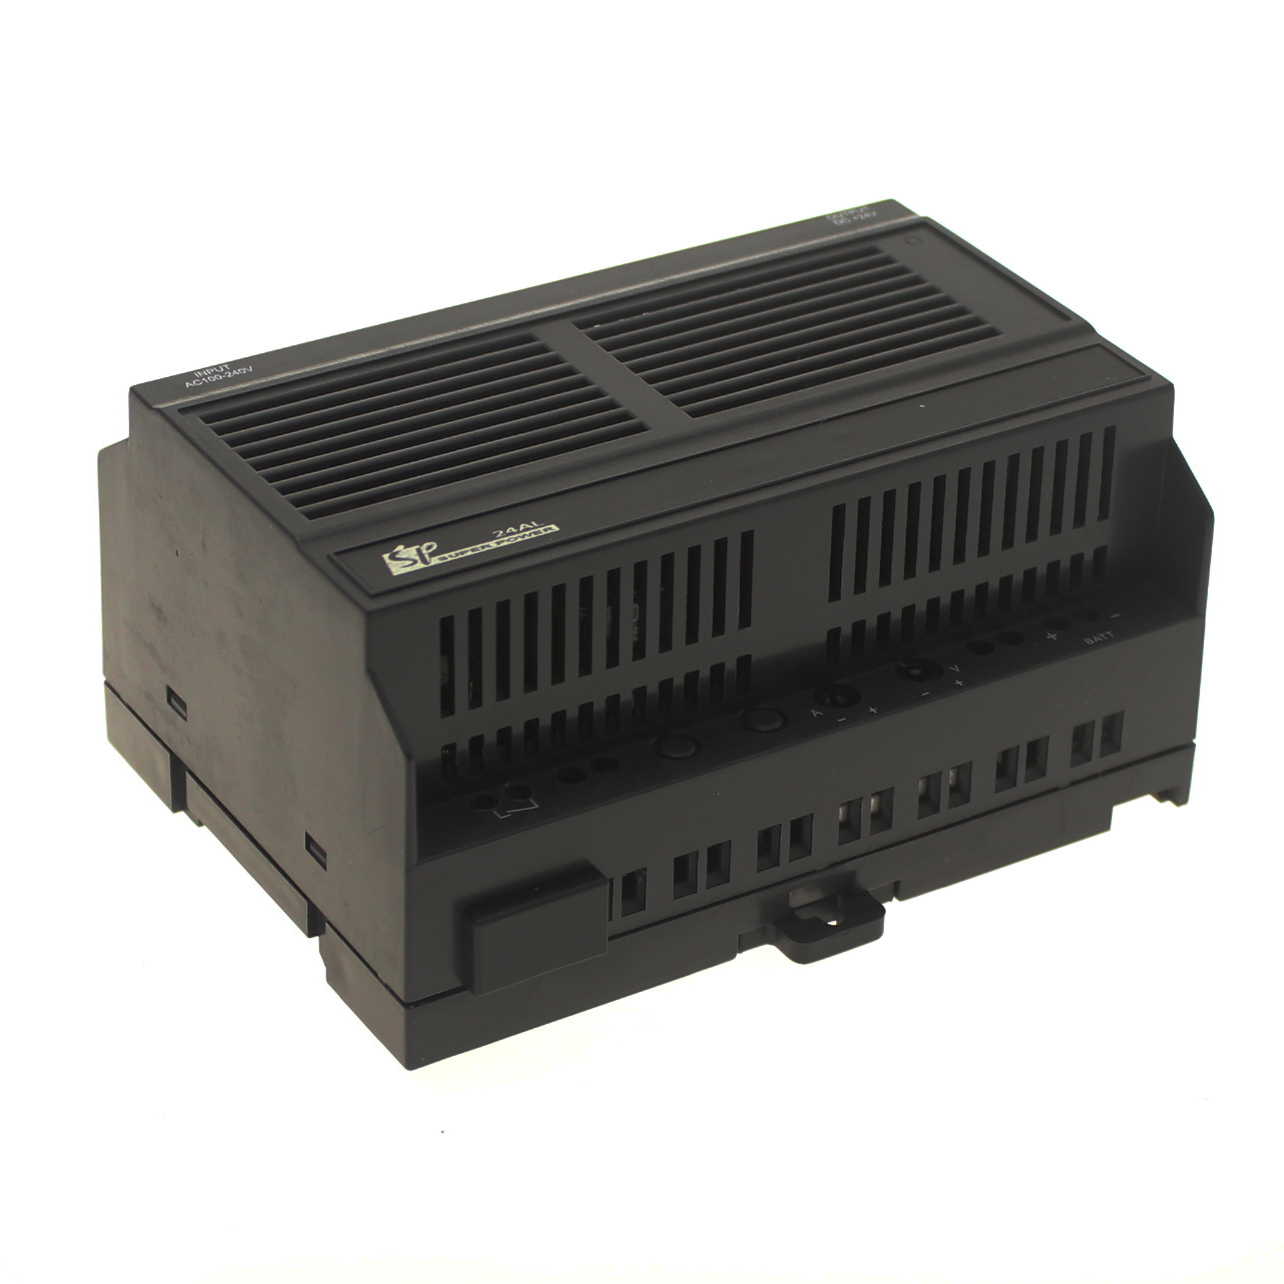 SP-24AL 100-240VAC 24 DC input,Switching power supply uninterrupted power supply extended module PLC 